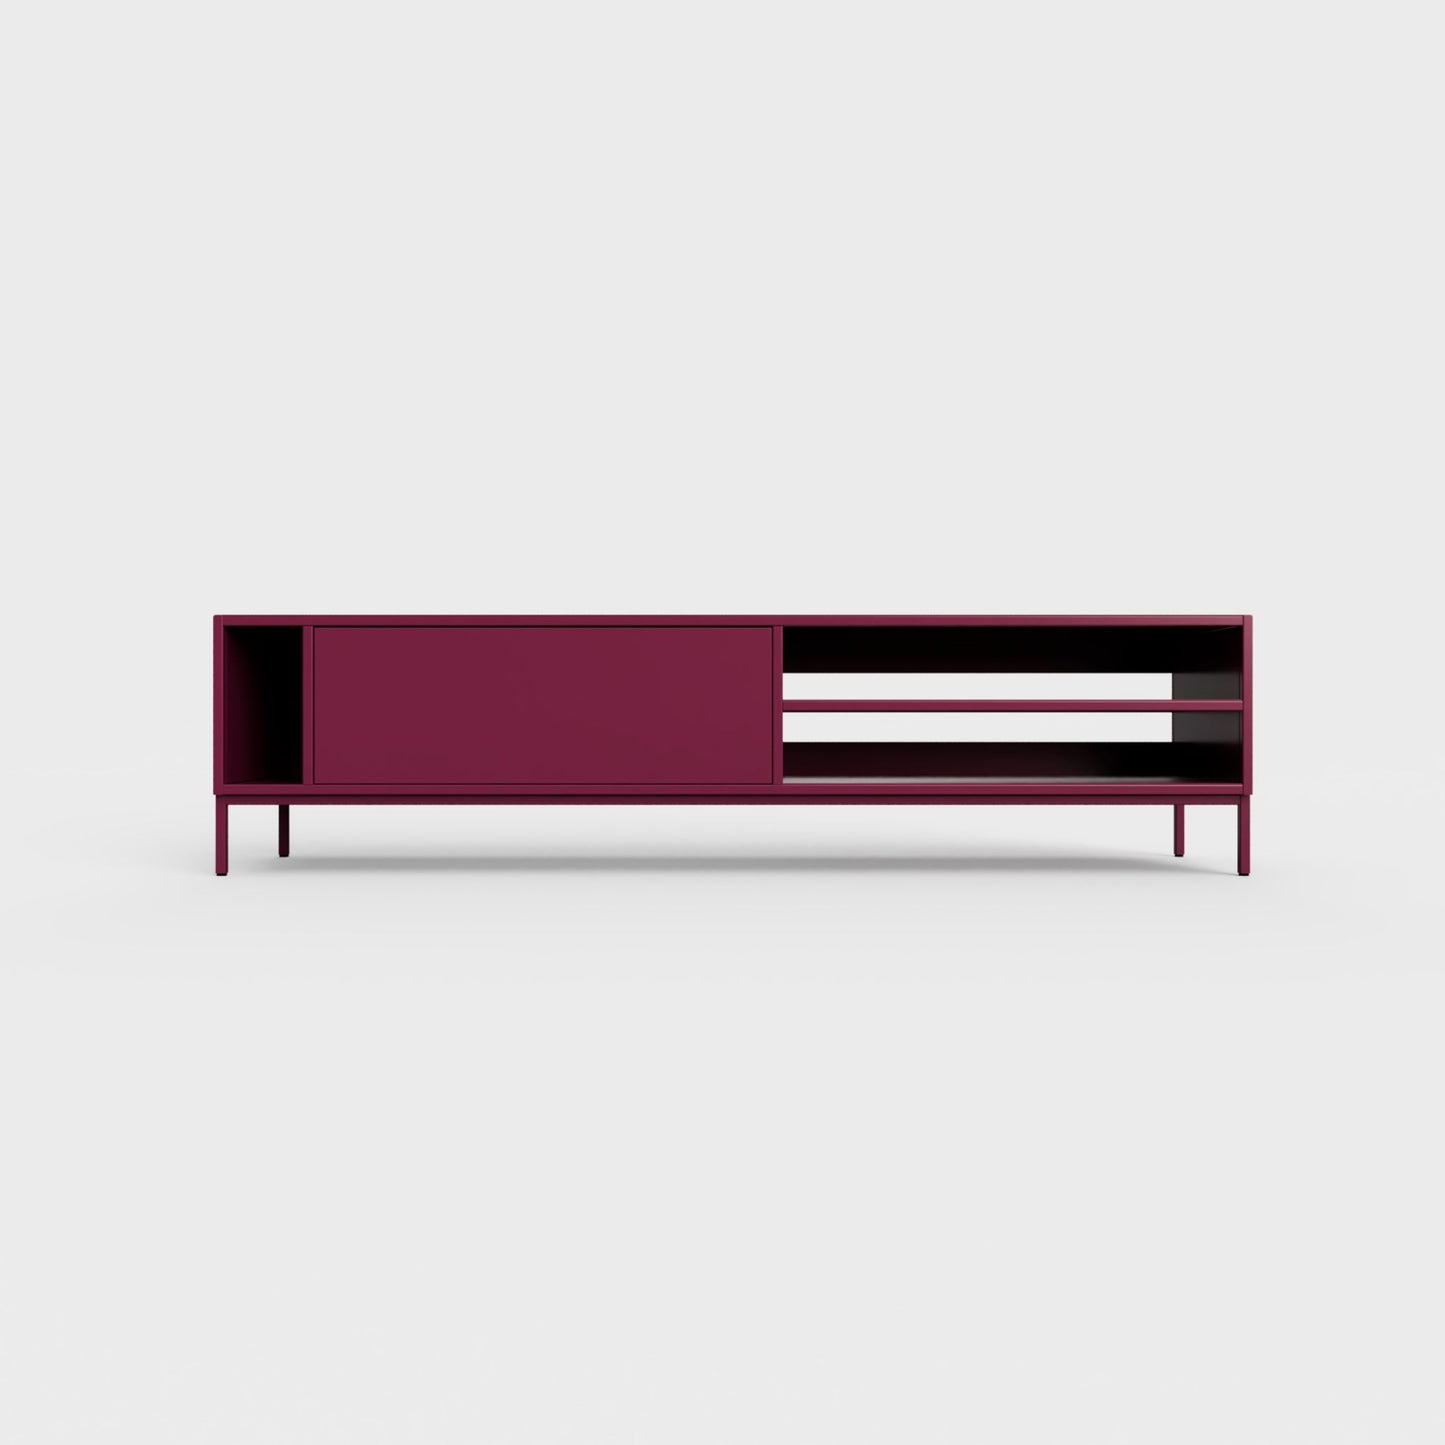 Prunus 03 Lowboard in plum purple red color, powder-coated steel, elegant and modern piece of furniture for your living room